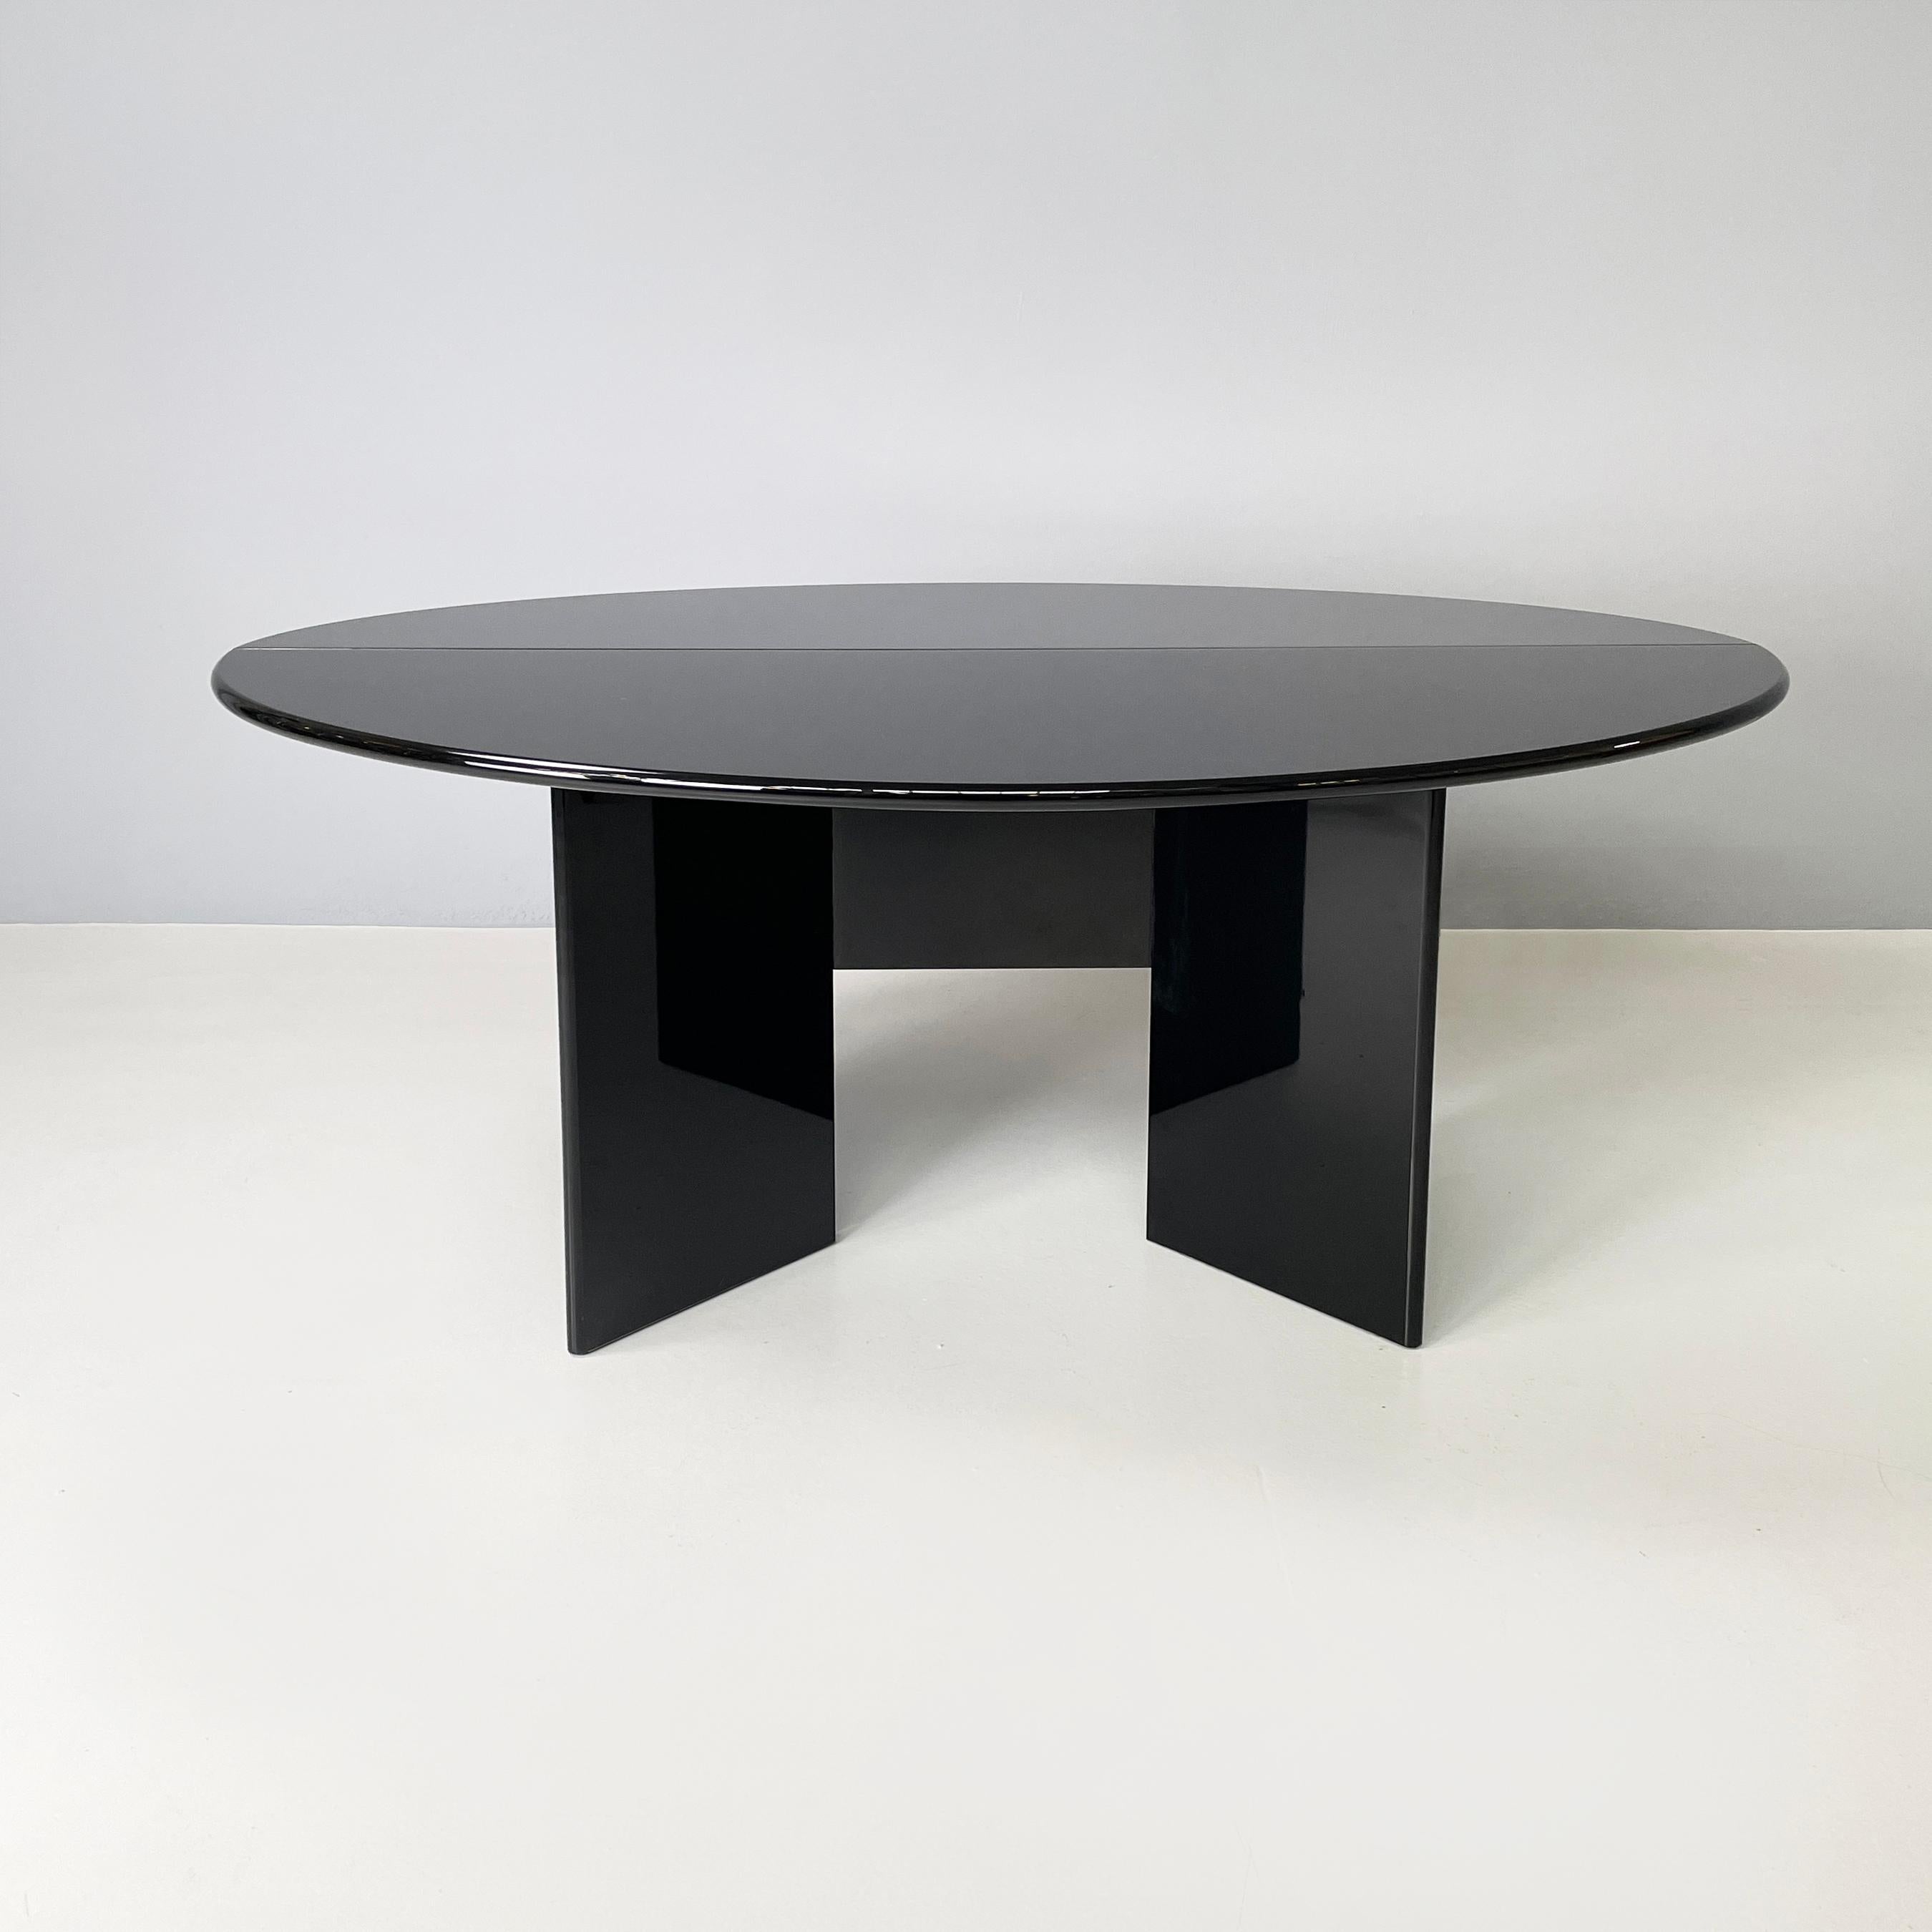 Modern Italian modern Black Dining table or console by Takahama for Cassina, 1970s For Sale